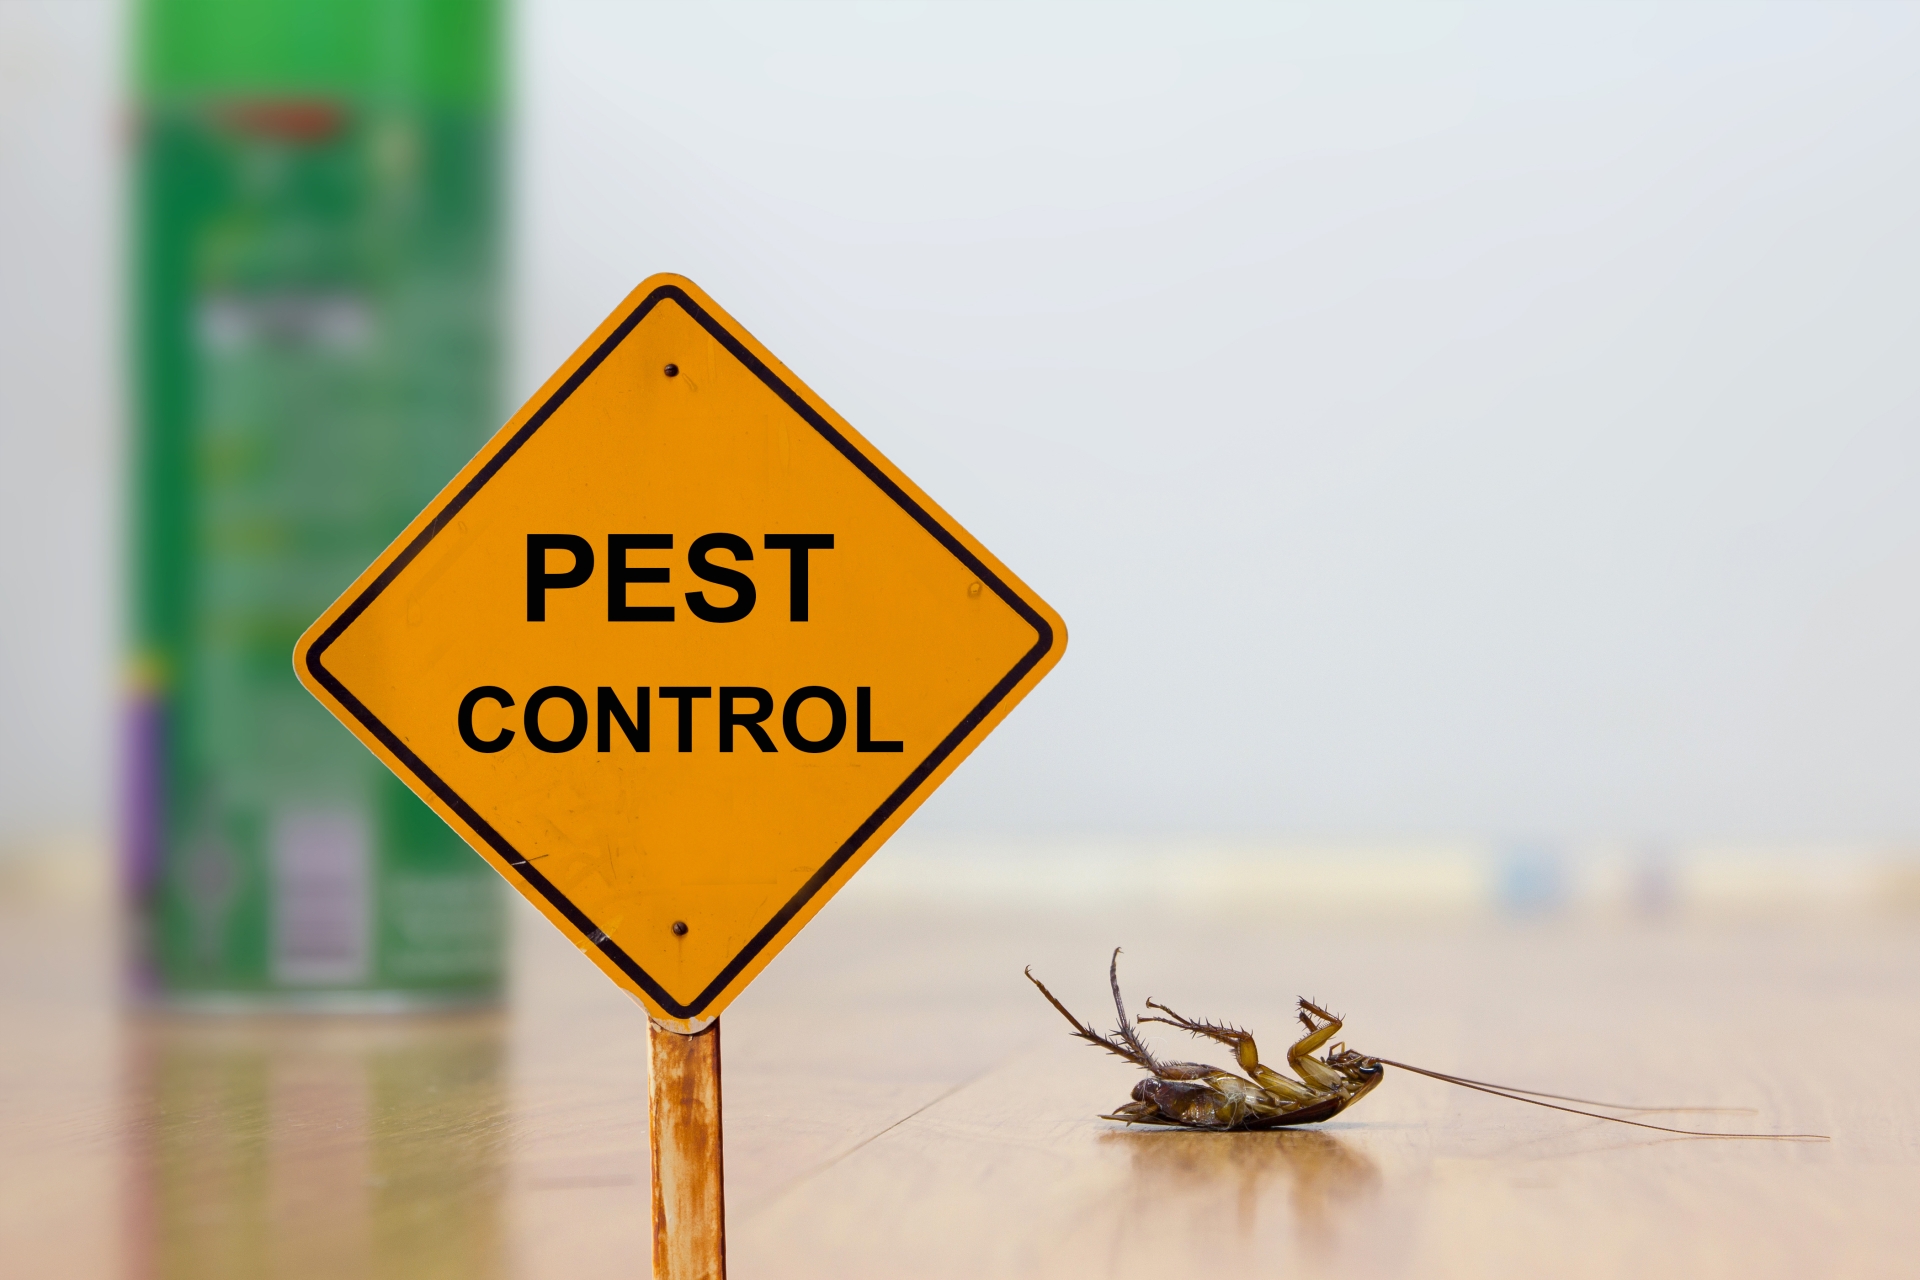 24 Hour Pest Control, Pest Control in Upminster, North Ockendon, RM14. Call Now 020 8166 9746